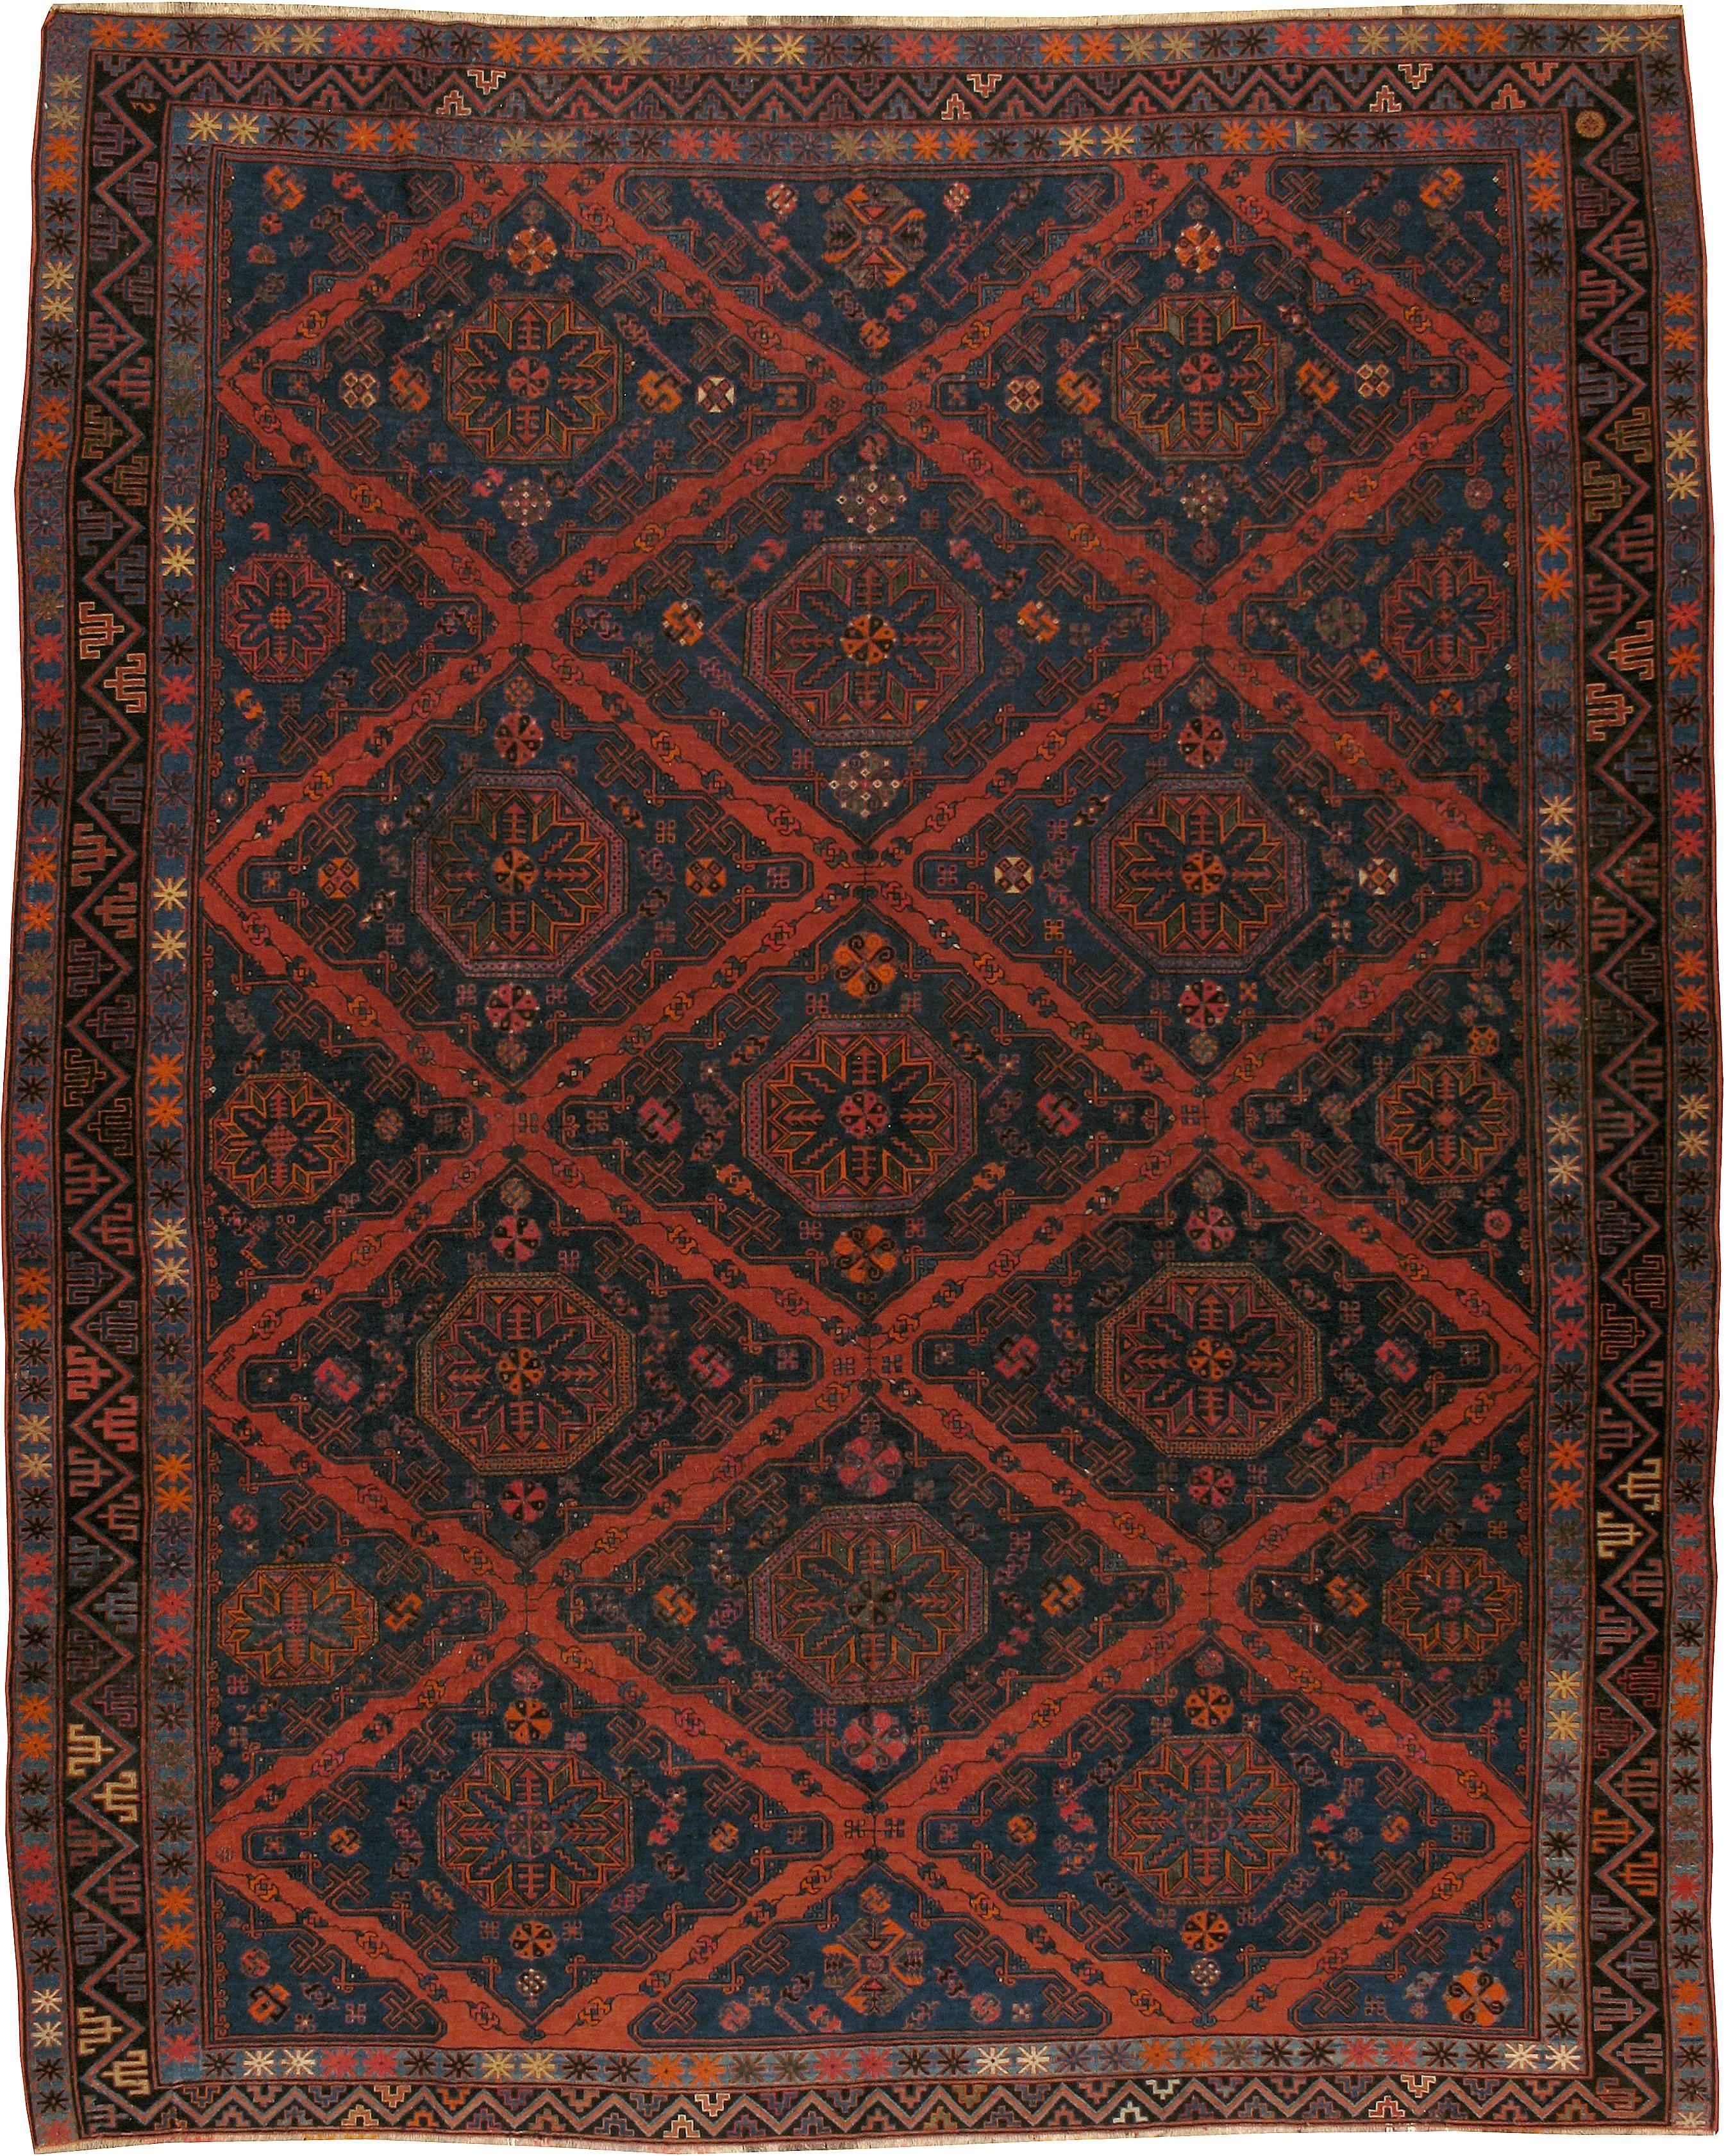 A vintage Russian Sumak (also spelled Soumak or sumac) carpet from the second quarter of the 20th century with Holbein octagon motifs within a lozenge design.